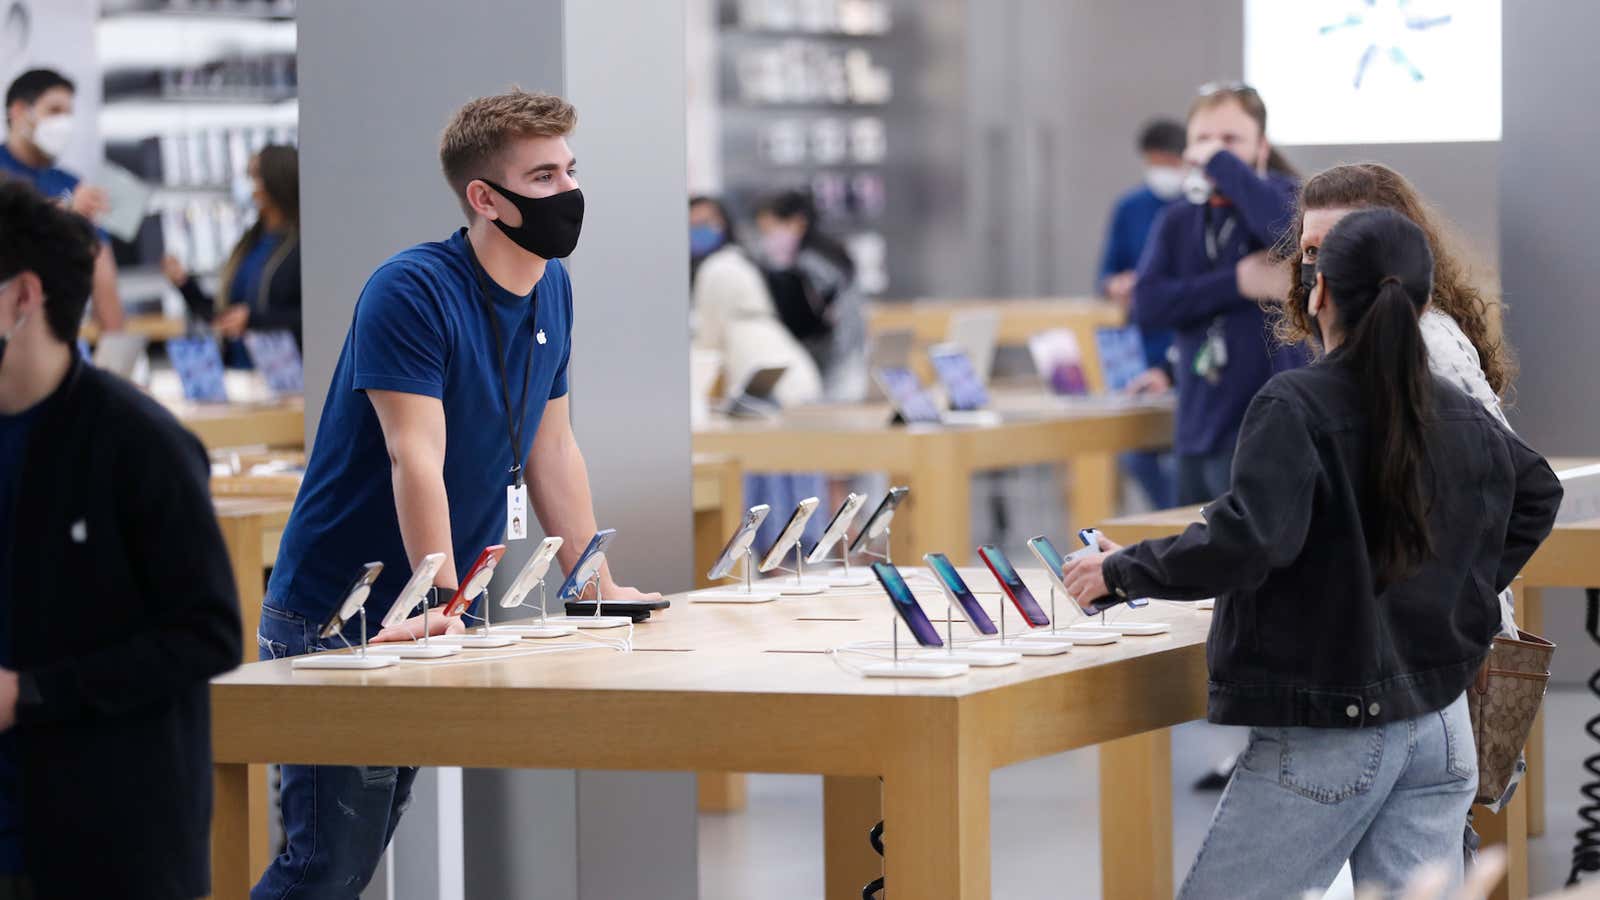 Apple (AAPL) Ups Benefits for Retail Workers in Tightening Labor Market -  Bloomberg